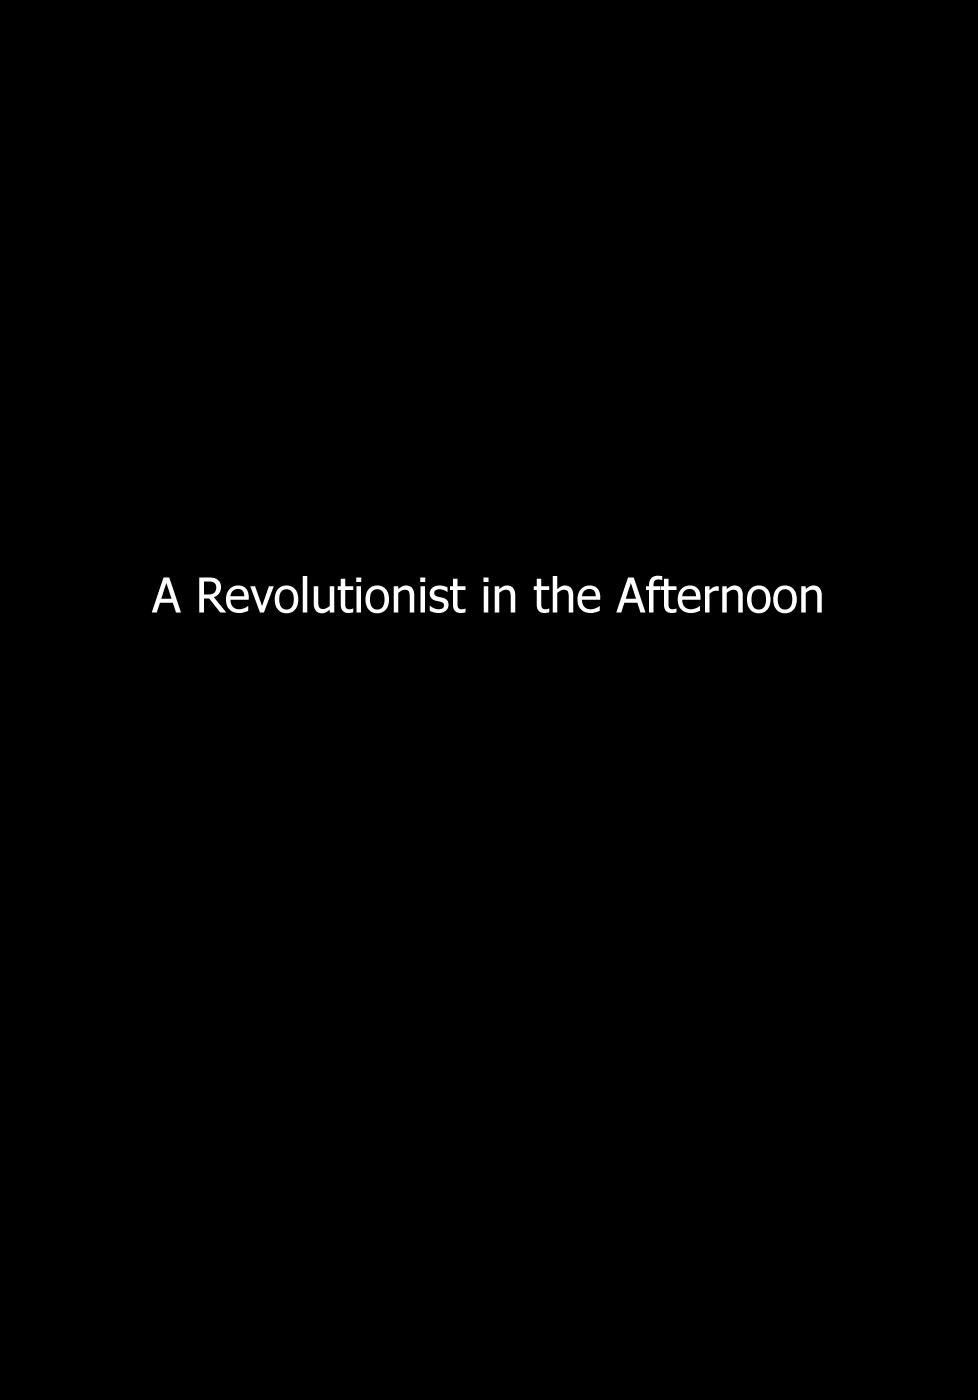 A Revolutionist in the Afternoon 5